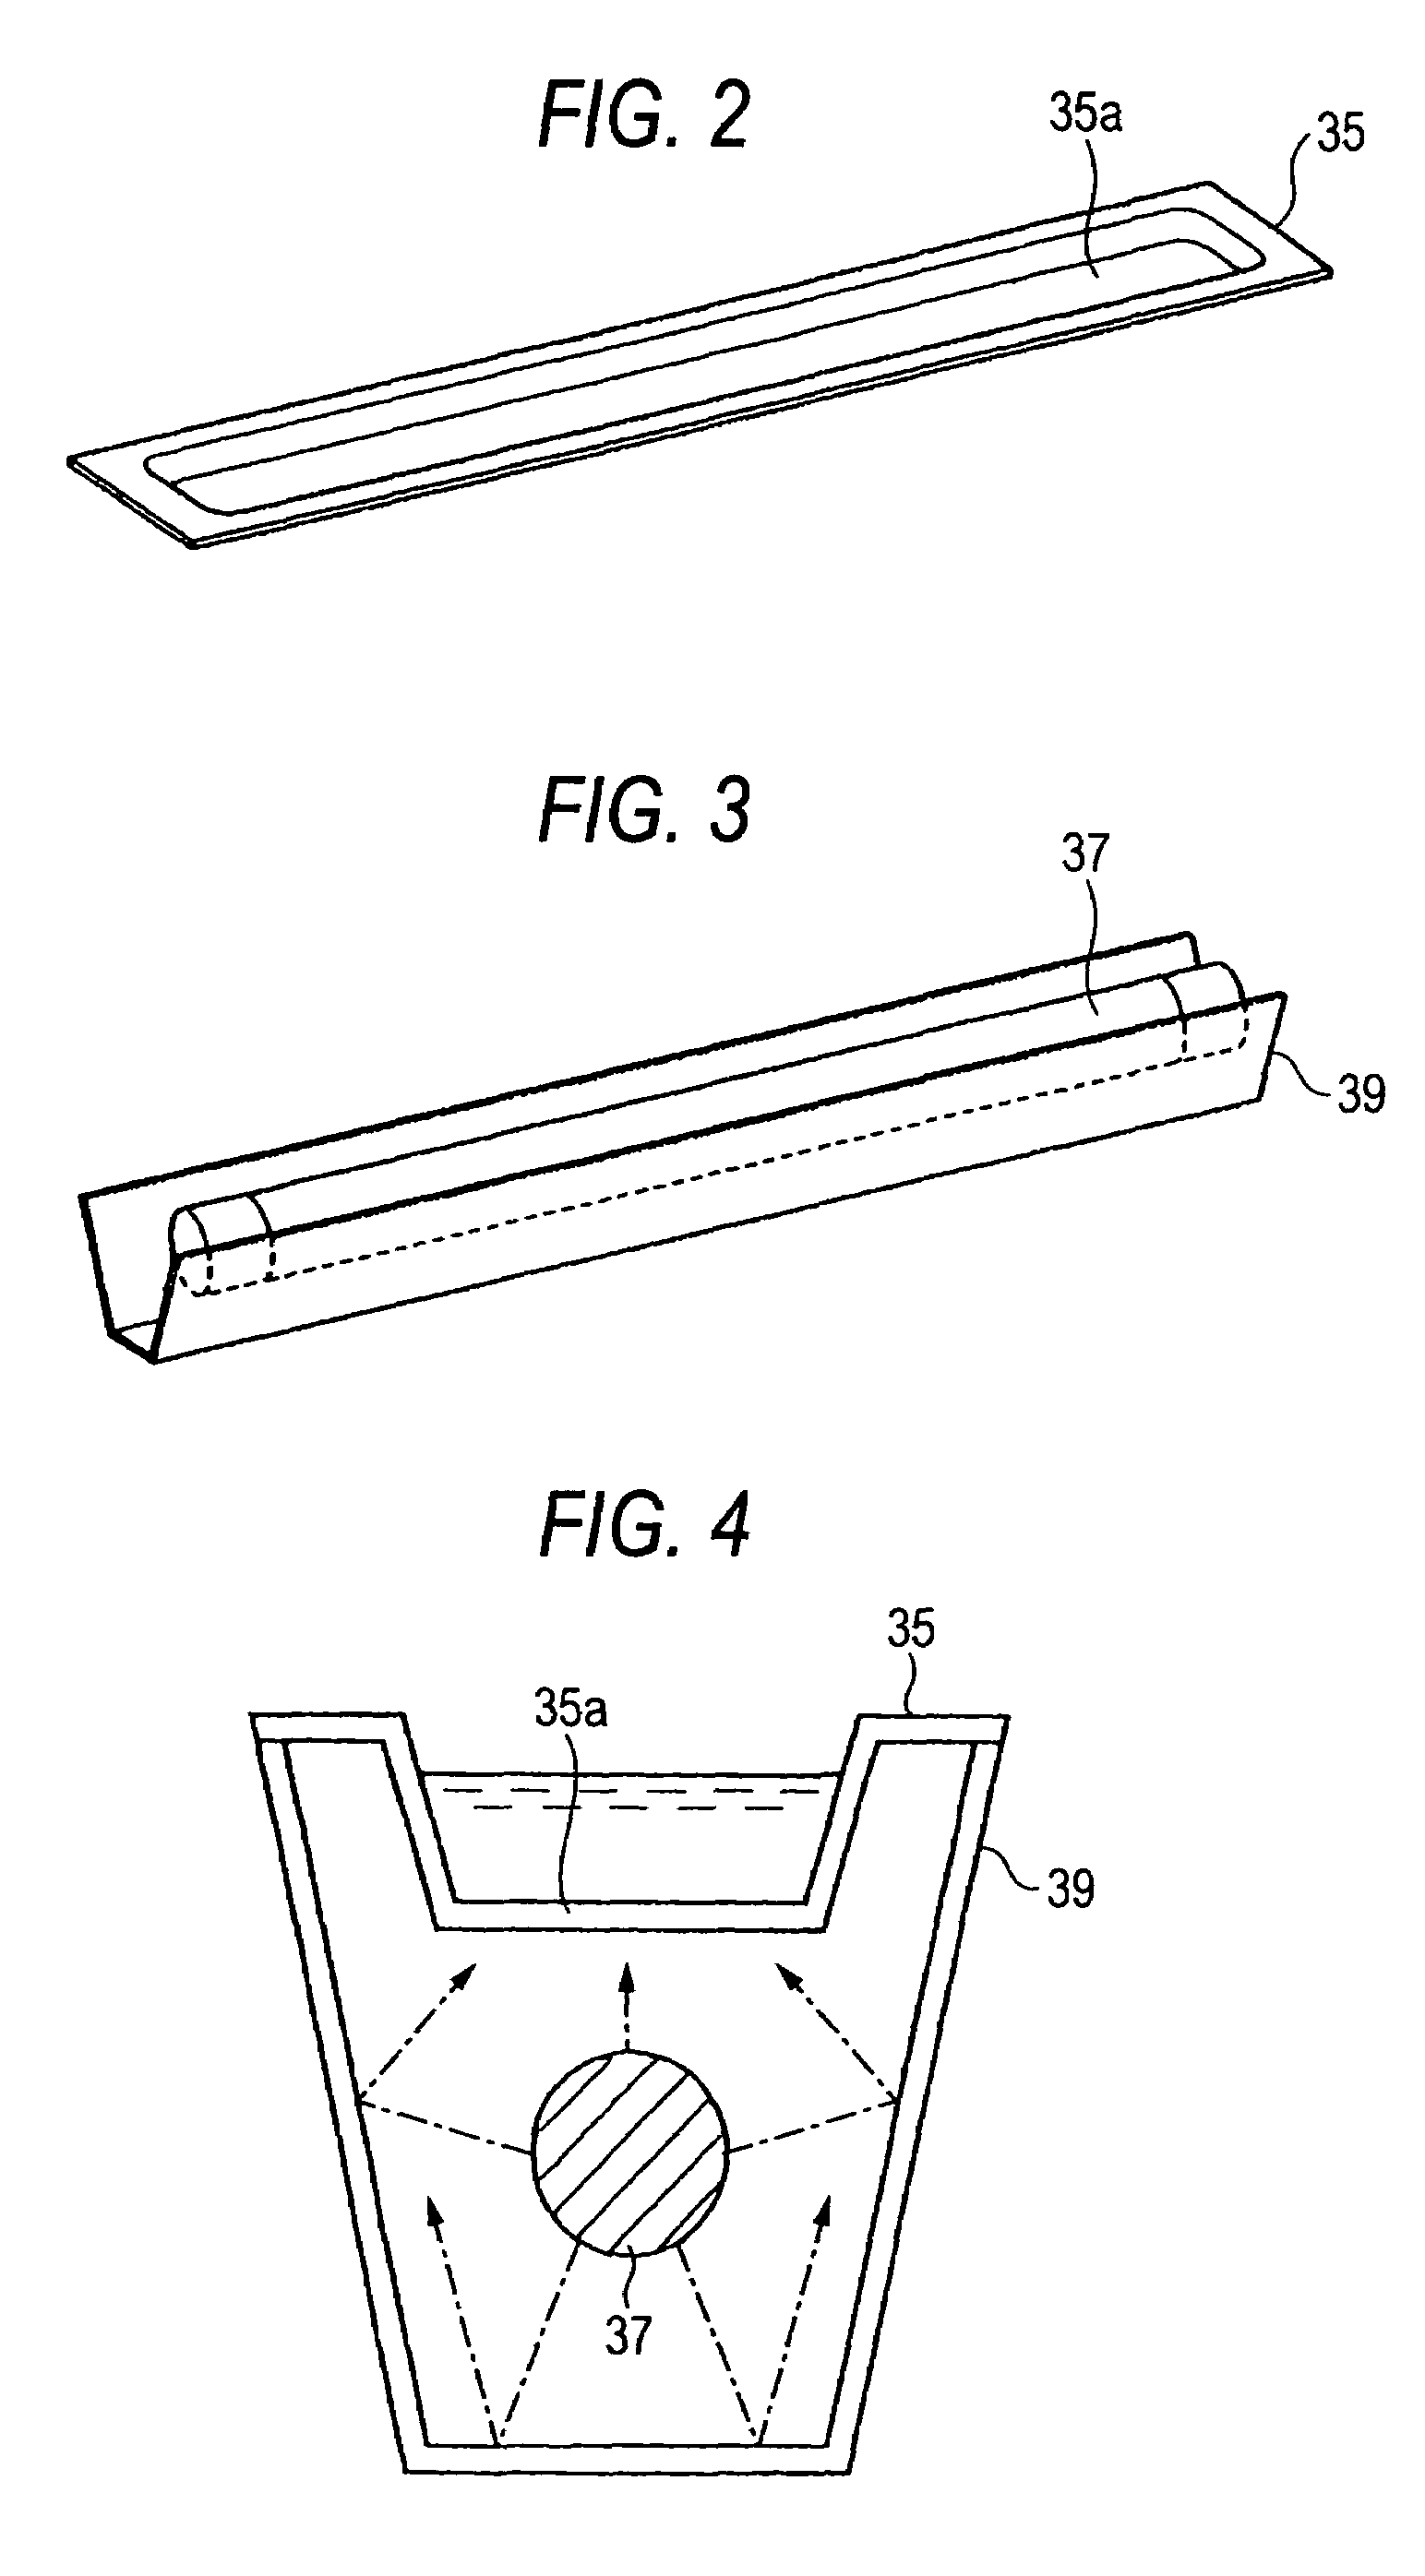 High frequency heating apparatus with steam generating function